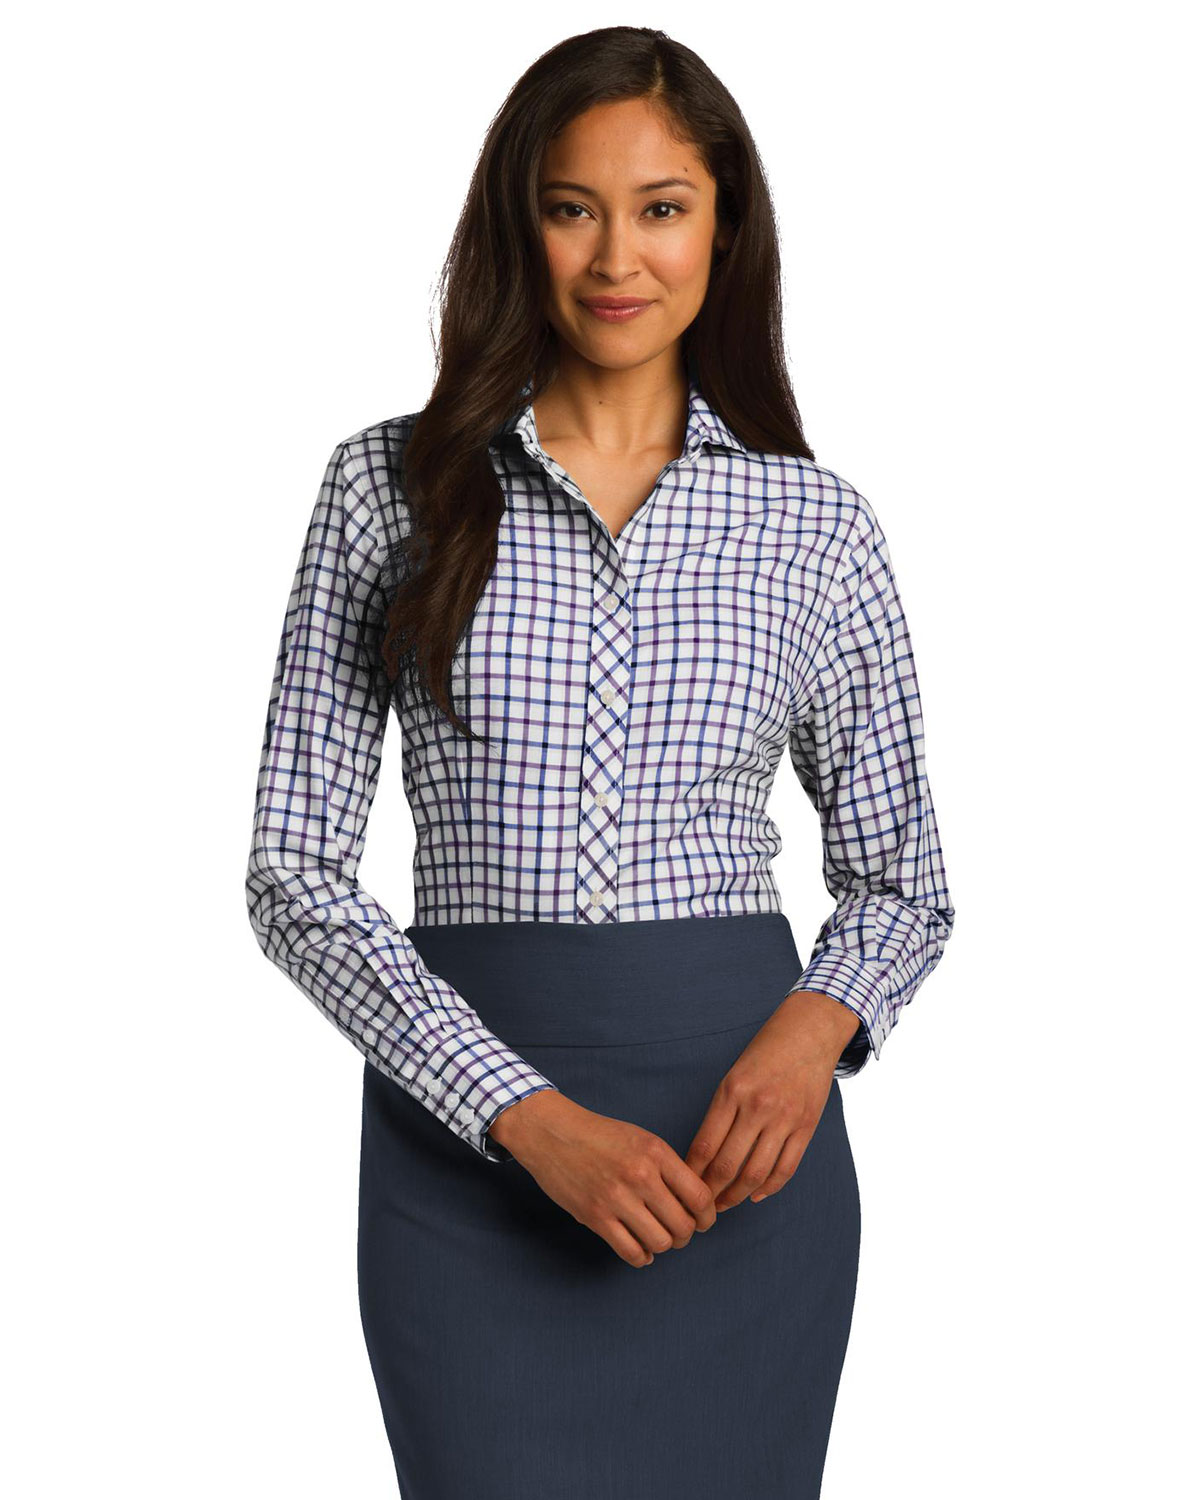 Red House RH75 Women Tricolor Check Non-Iron Shirt at Apparelstation